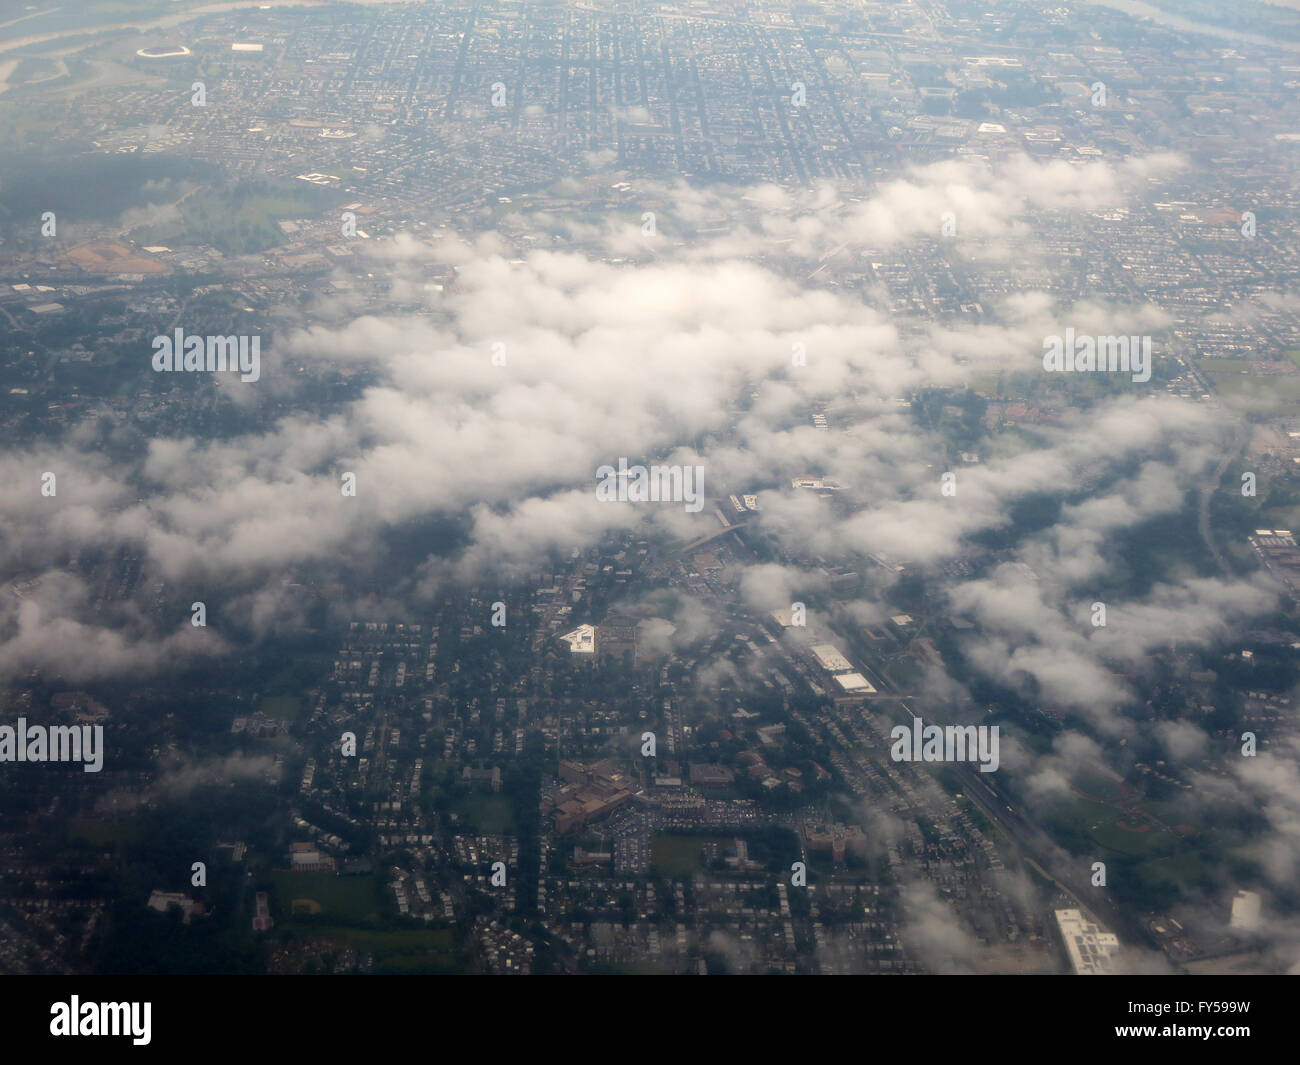 Clouds hover over Washington DC area aerial cityscape. Stock Photo